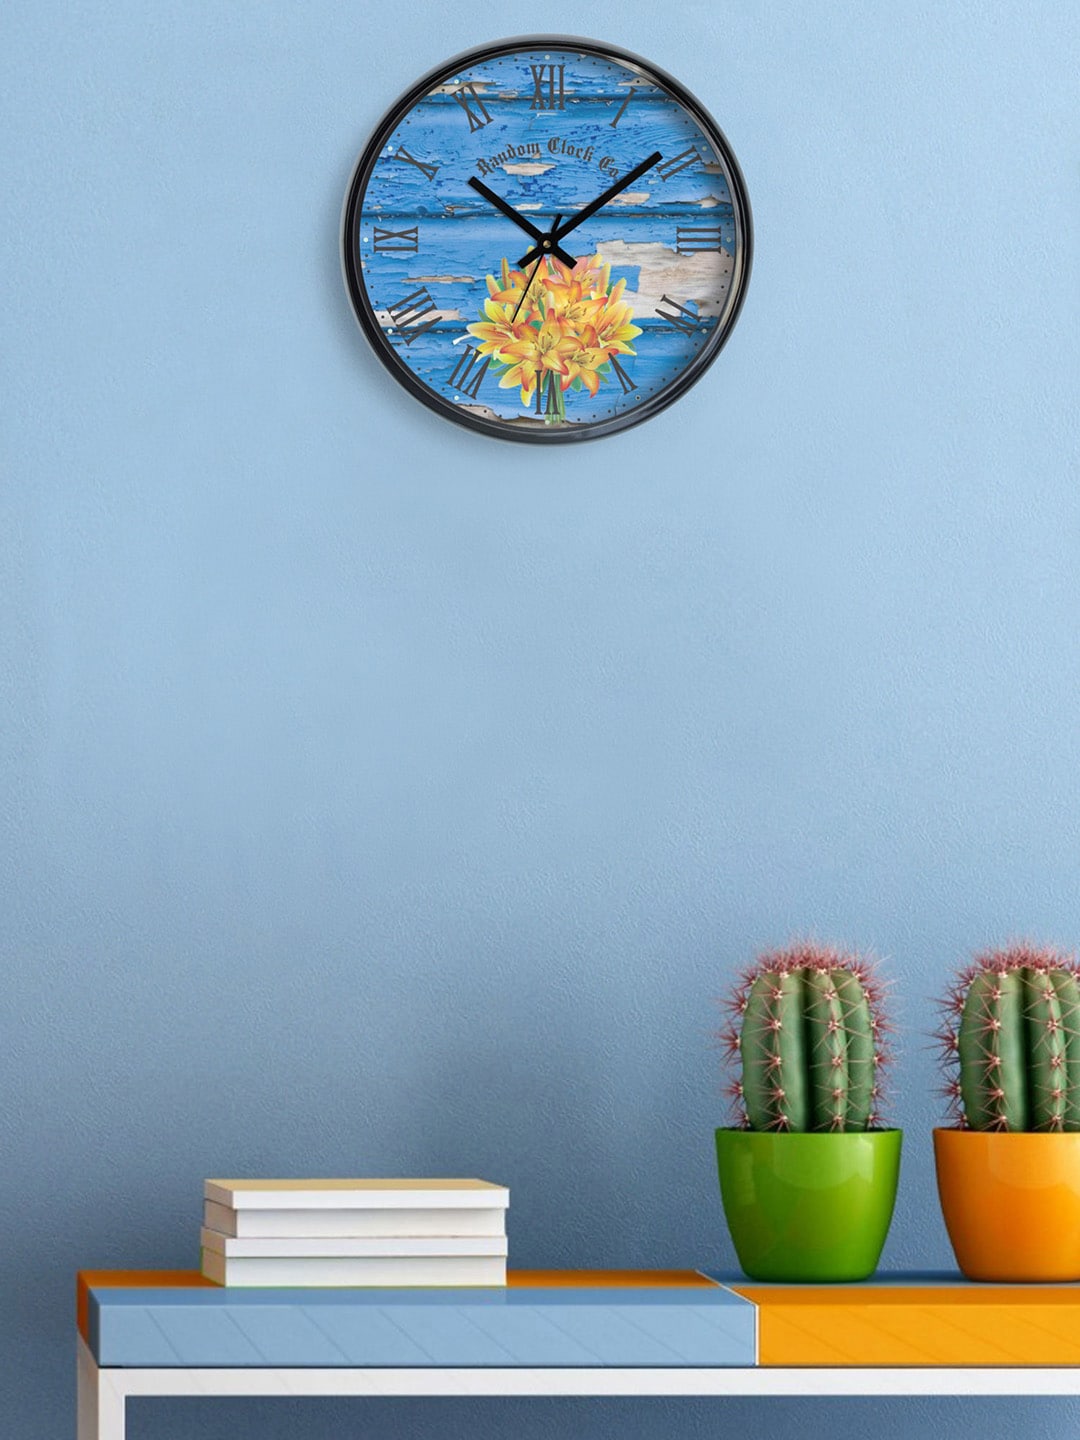 RANDOM Blue Printed Analogue 30.5 cm Wall Clock Price in India